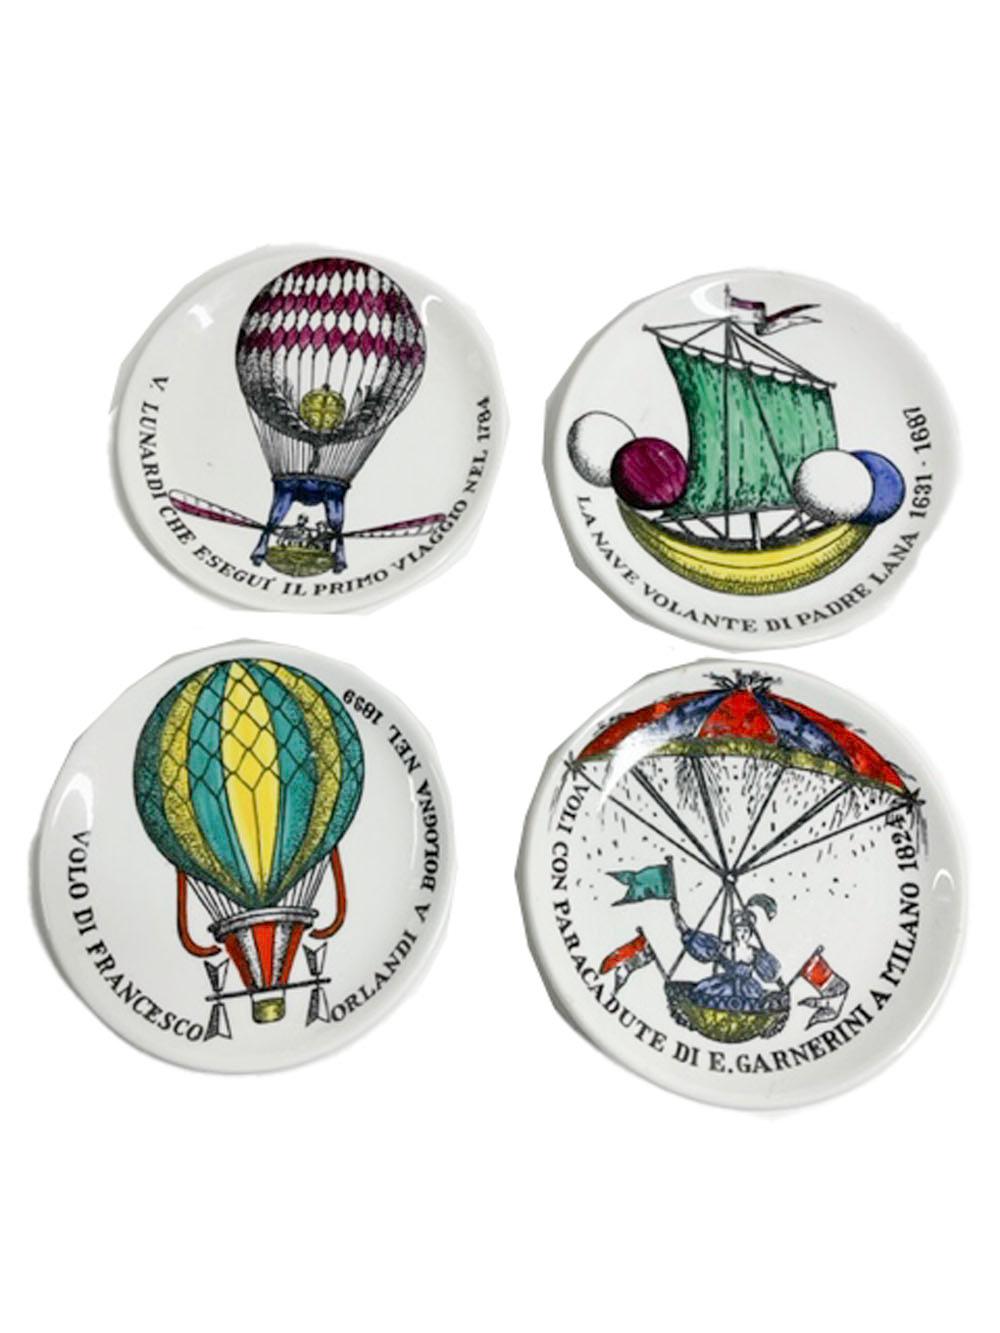 Italian MCM Ceramic Coasters by Fornasetti, Painted with Hot Air Balloons, 